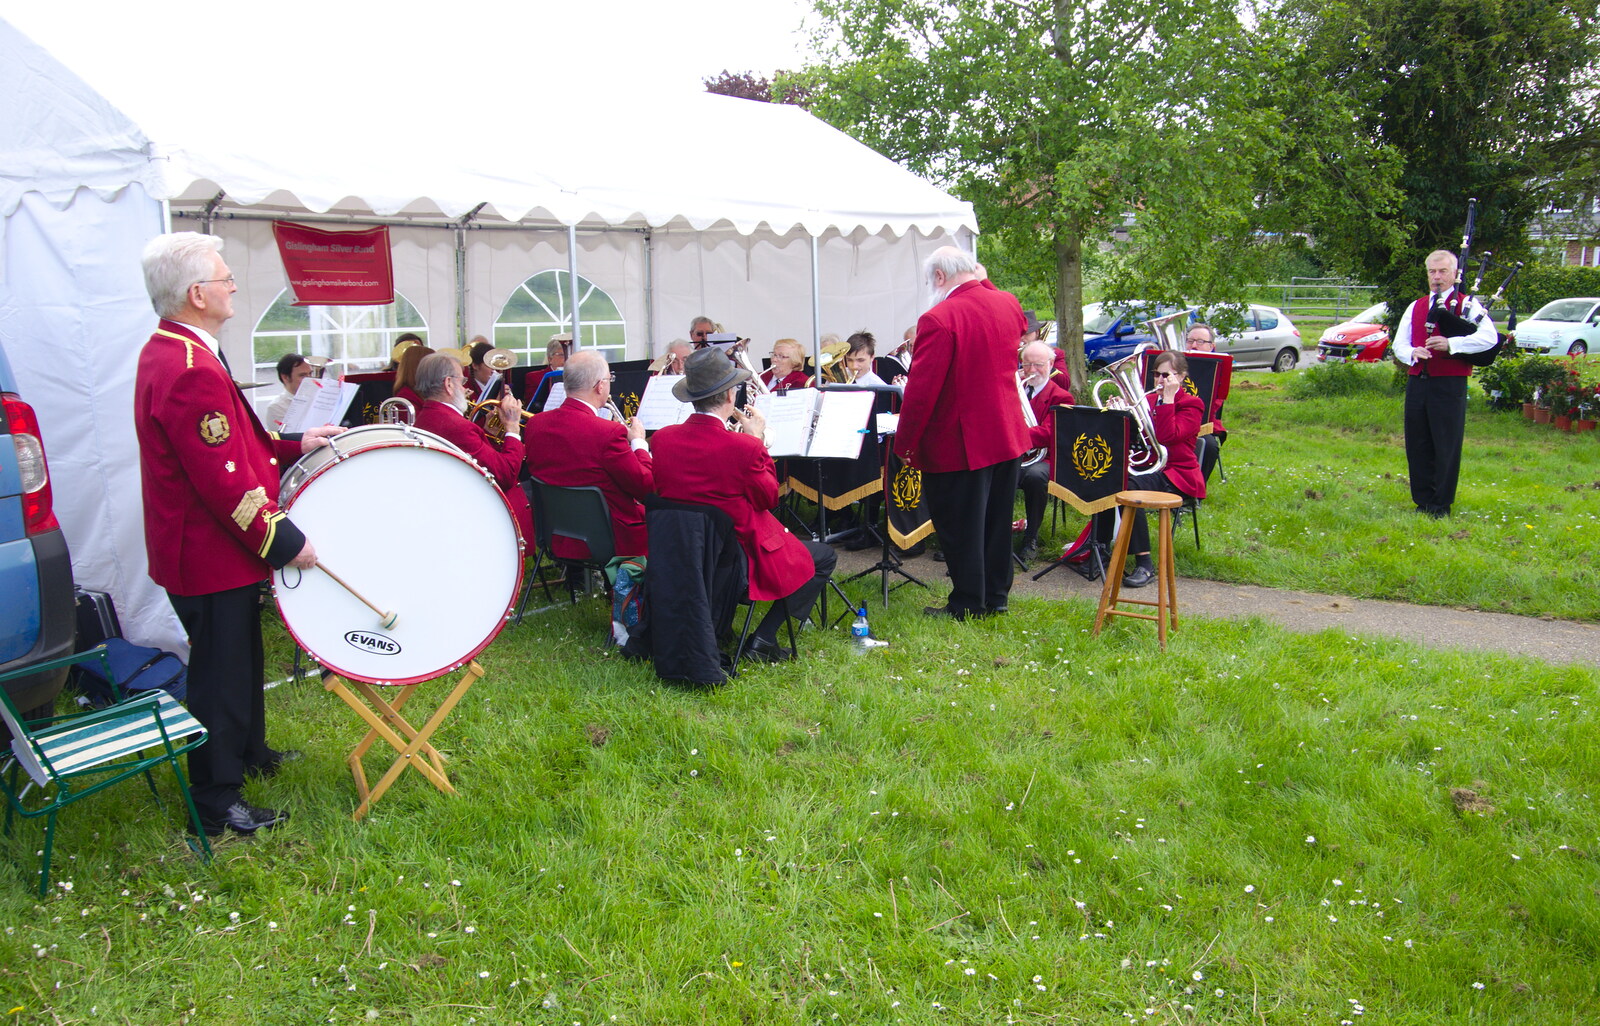 The bagpipes are out from The Gislingham Silver Band at the Village Hall, Gislingham, Suffolk - 12th May 2019